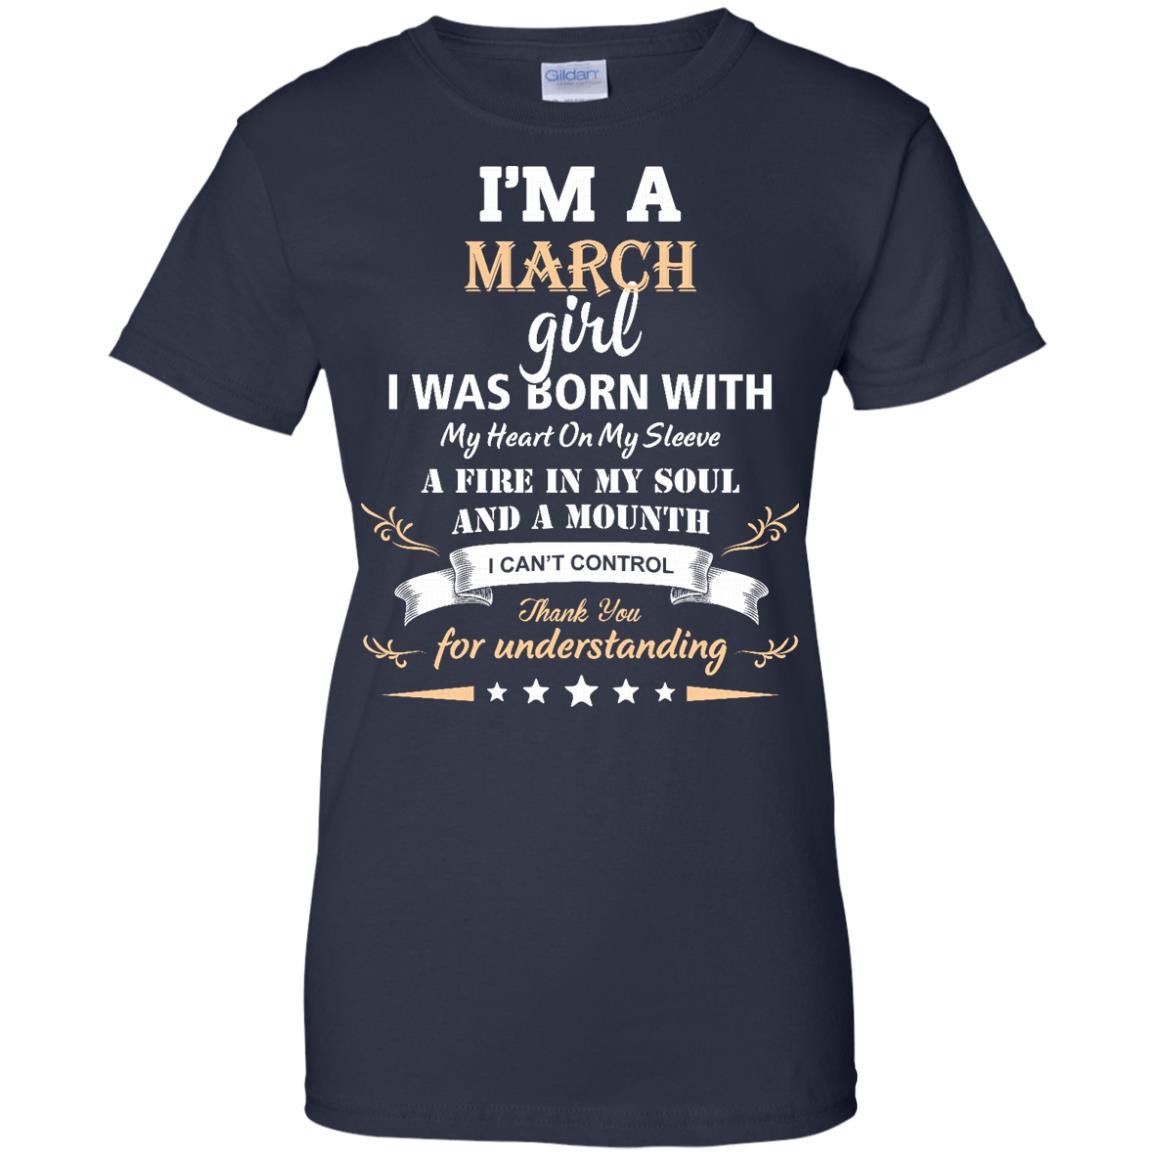 Im a March girl shirts - I was born with my heart on my sleeve a fine ...